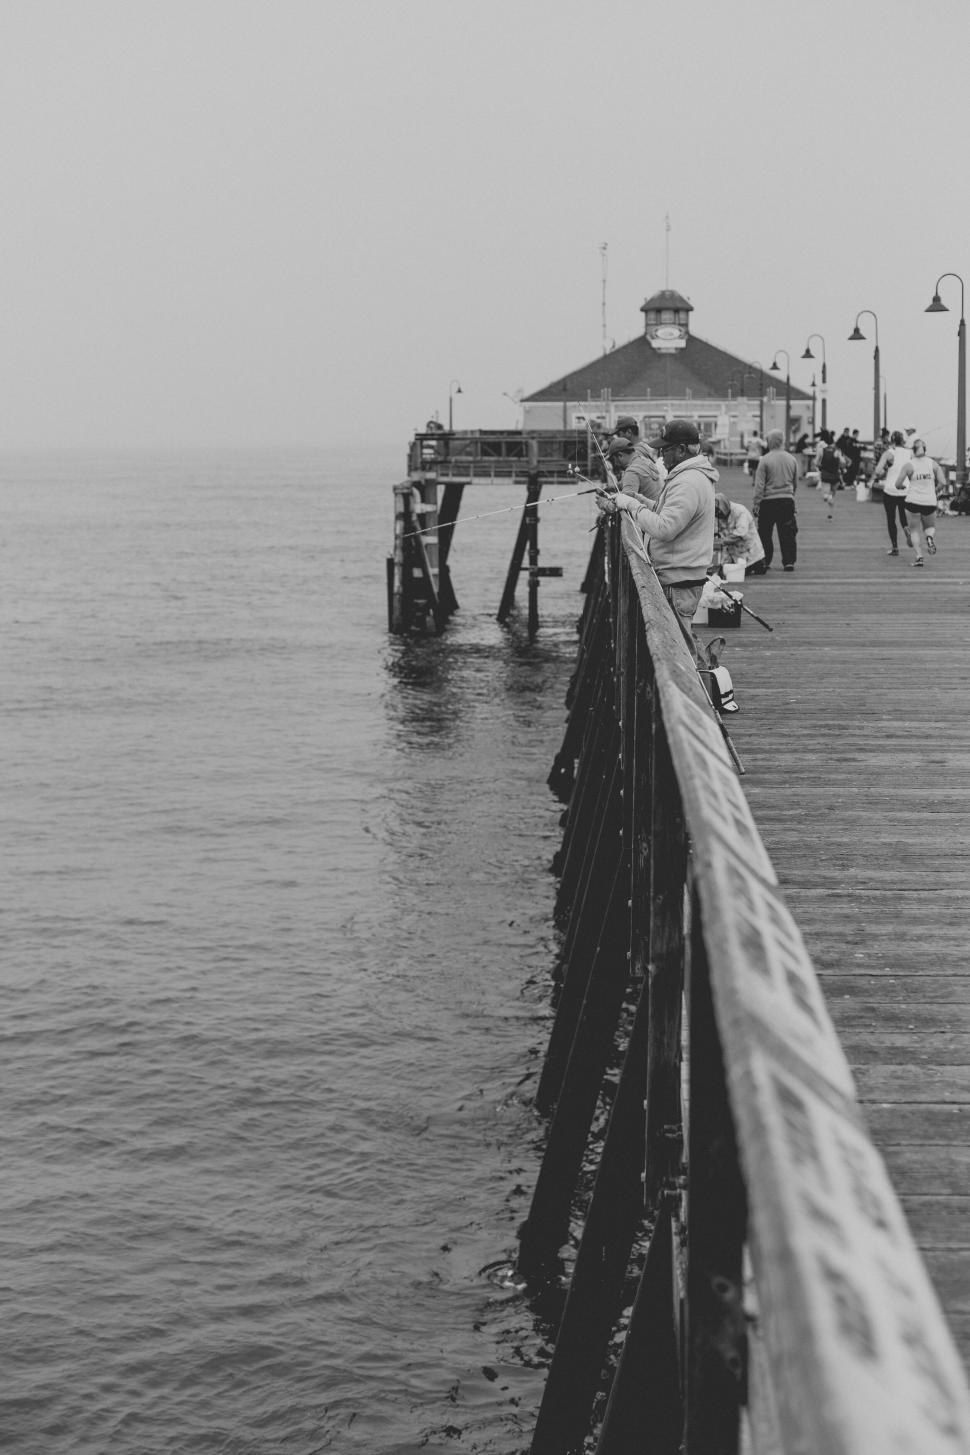 Free Image of Foggy pier with people strolling along 